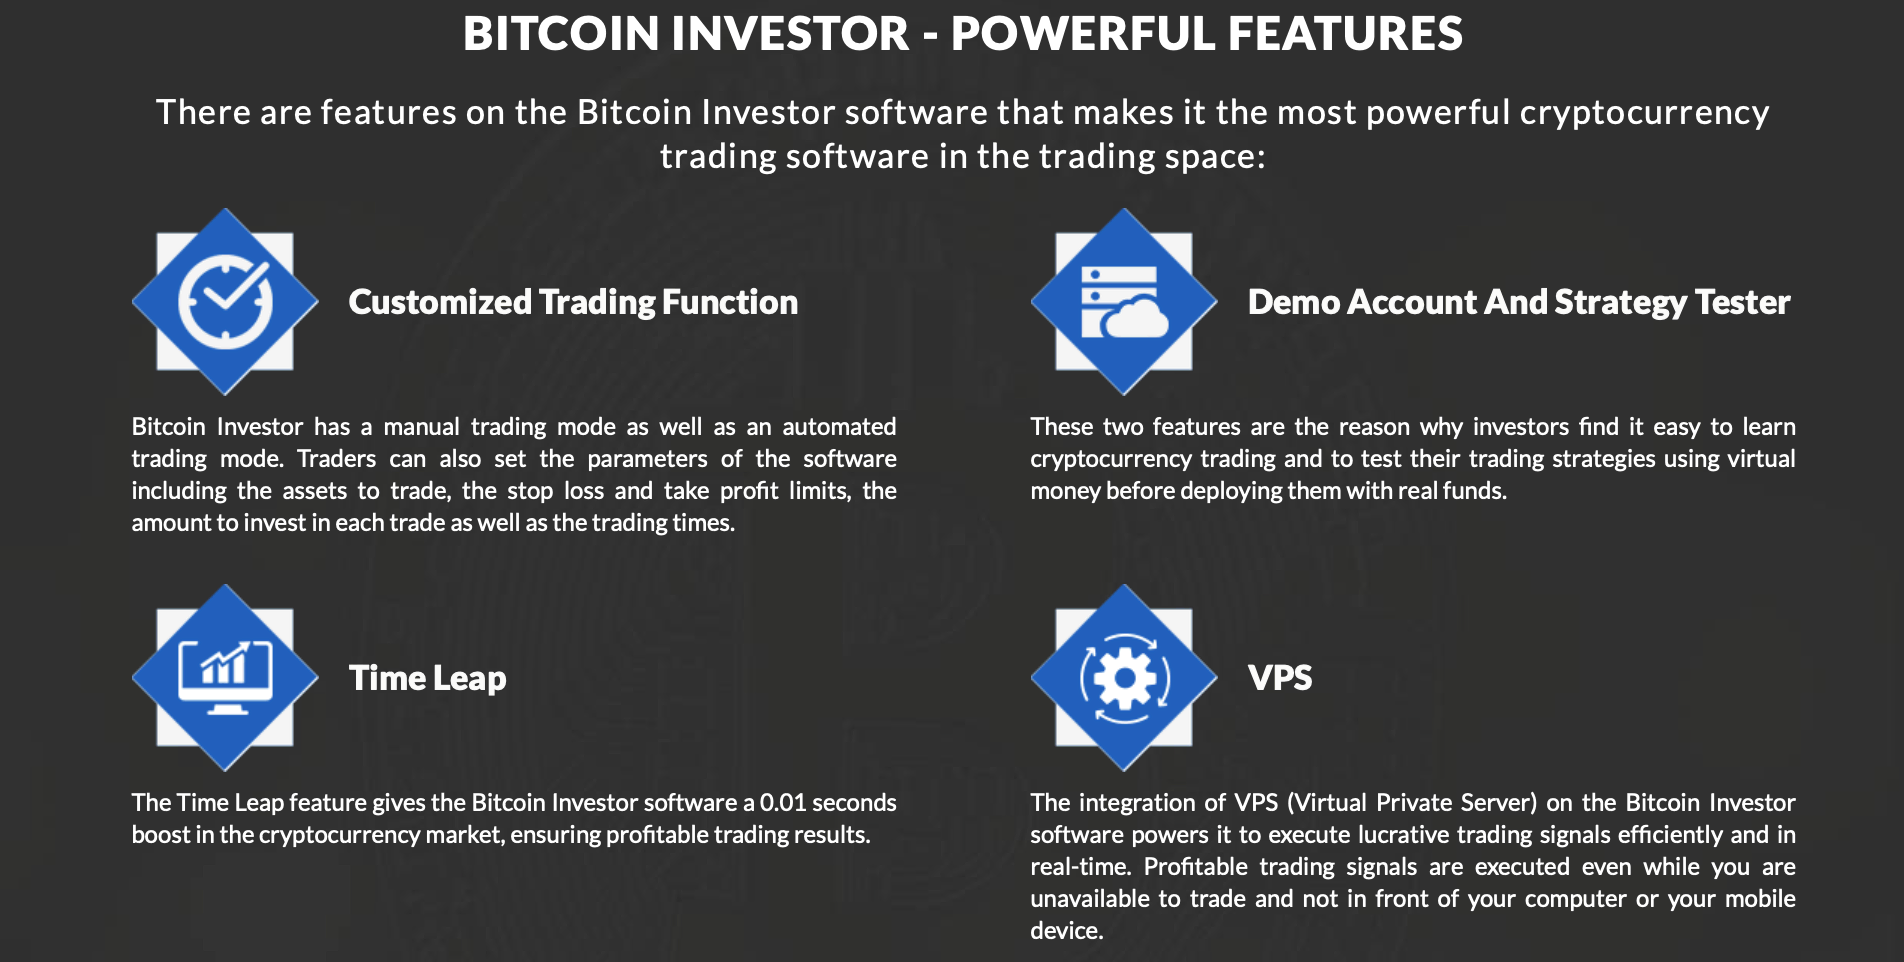 Features of Bitcoin Investor